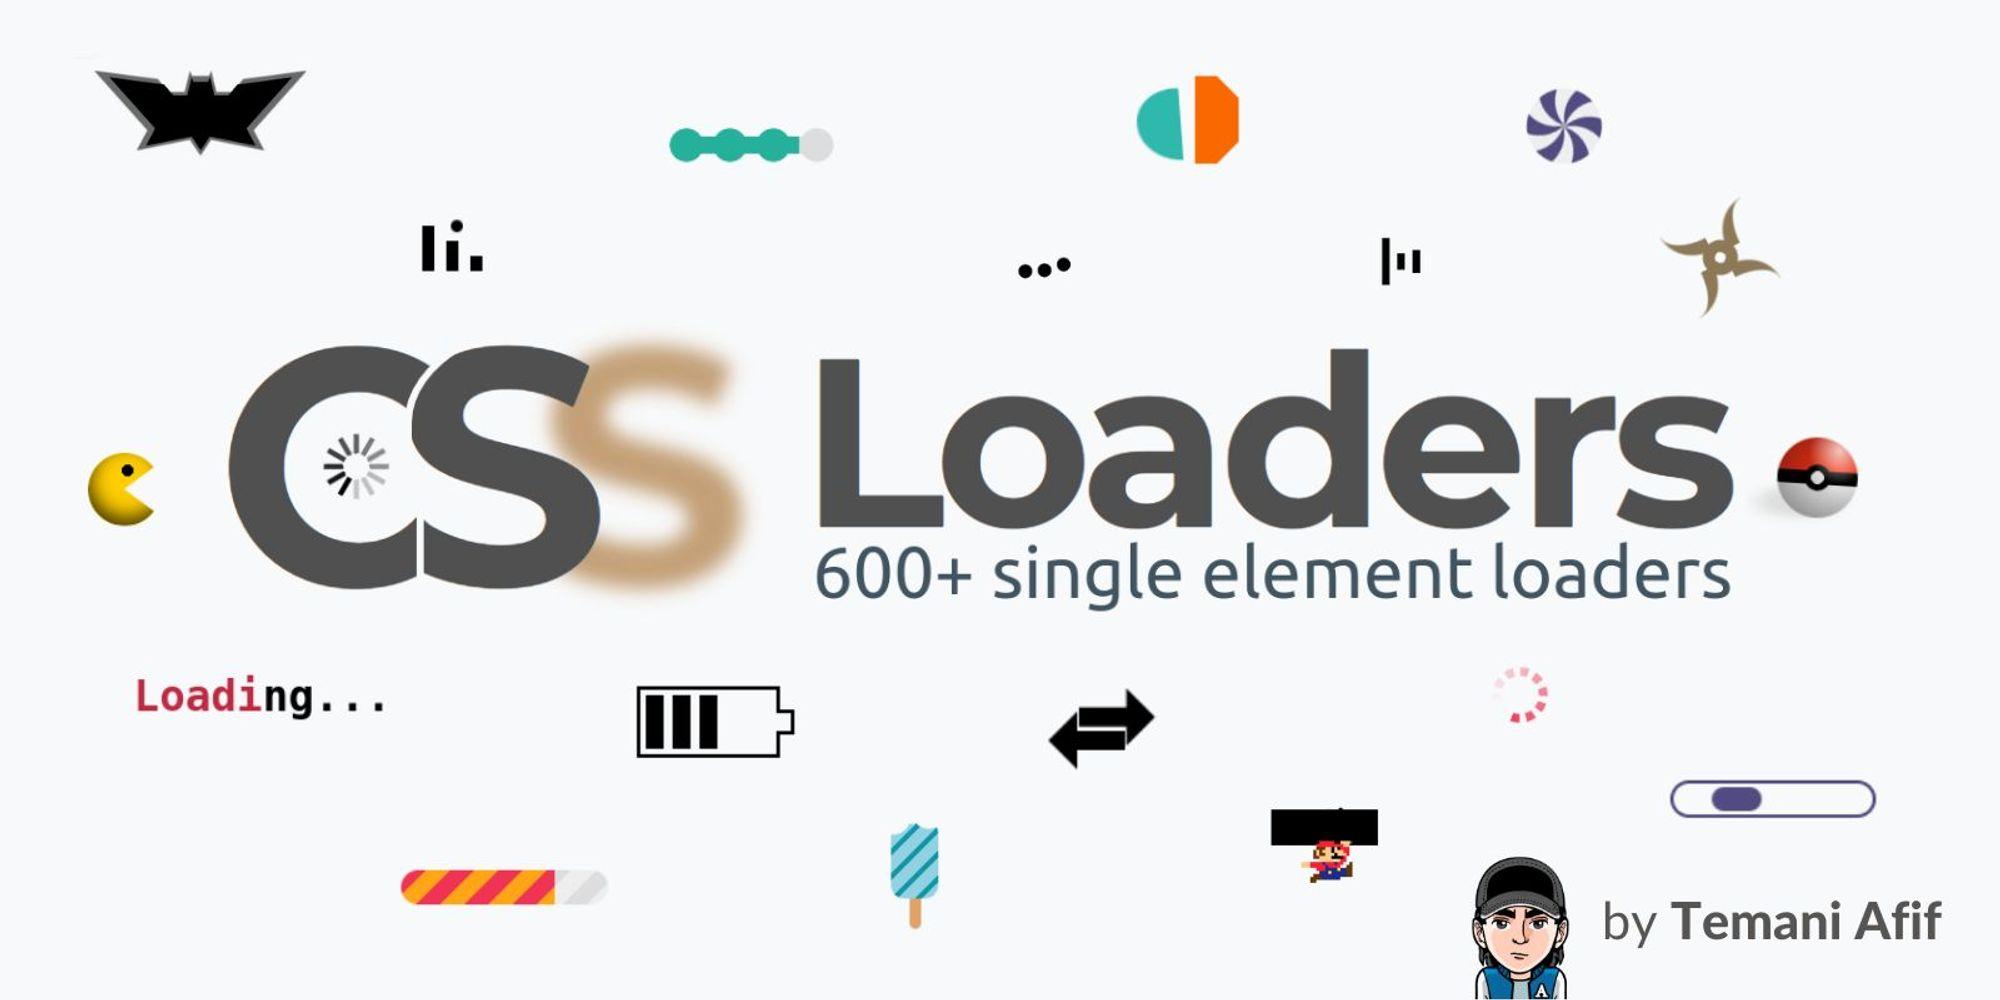 CSS Loaders: A collection of more than 500 loading animations